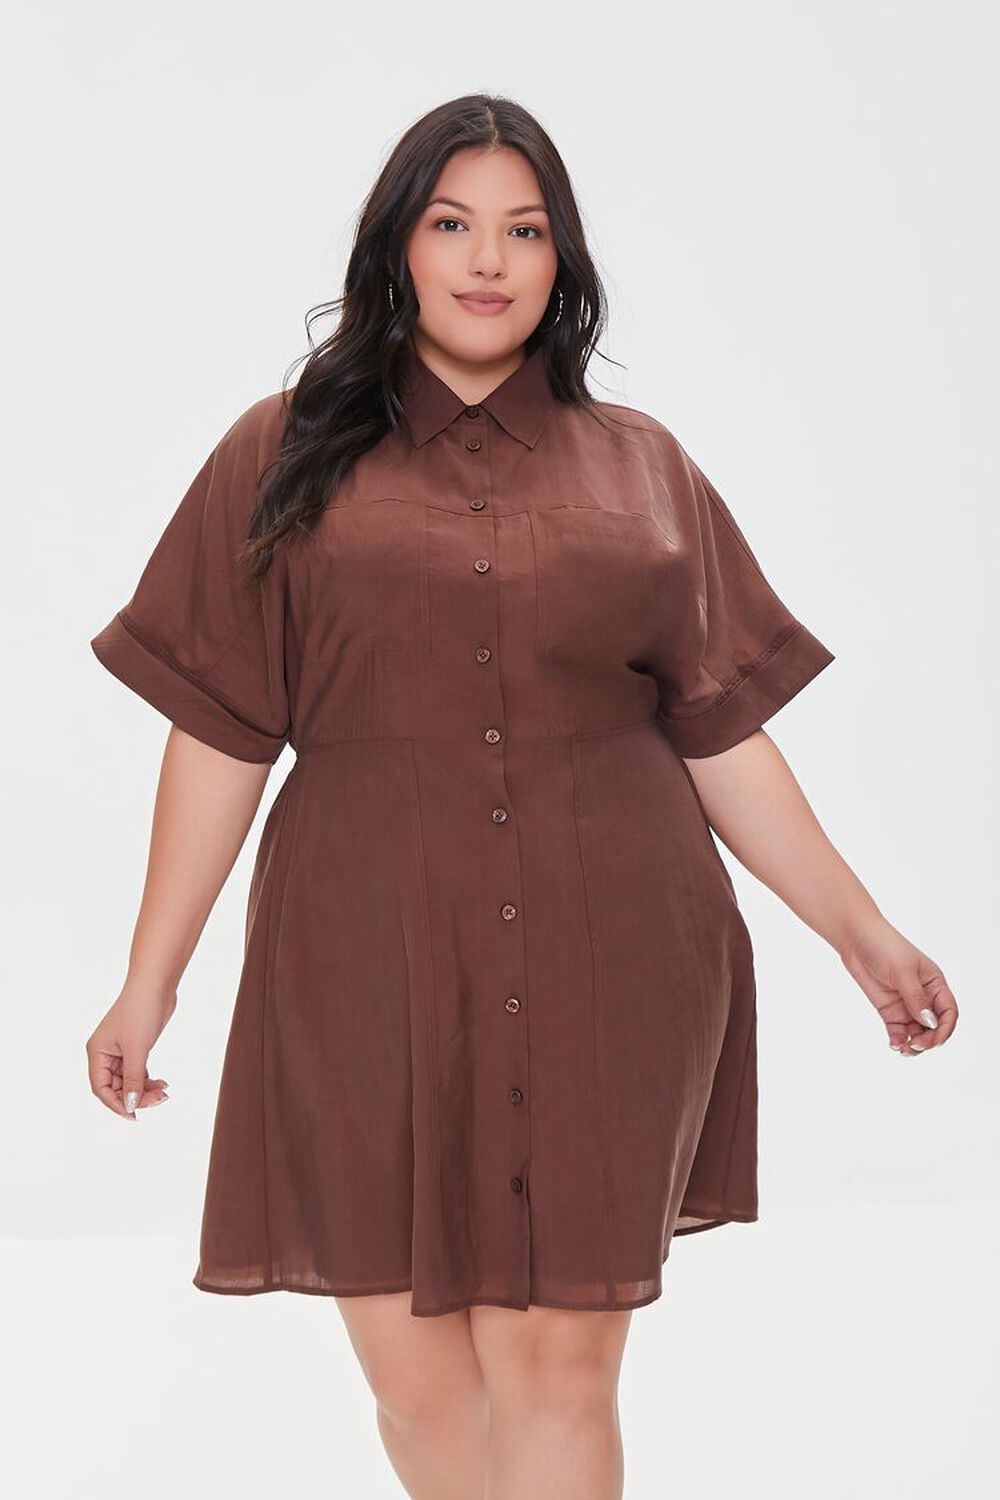 A-Line Shirt Dress for Plus Size Apple Shape By forever21.com